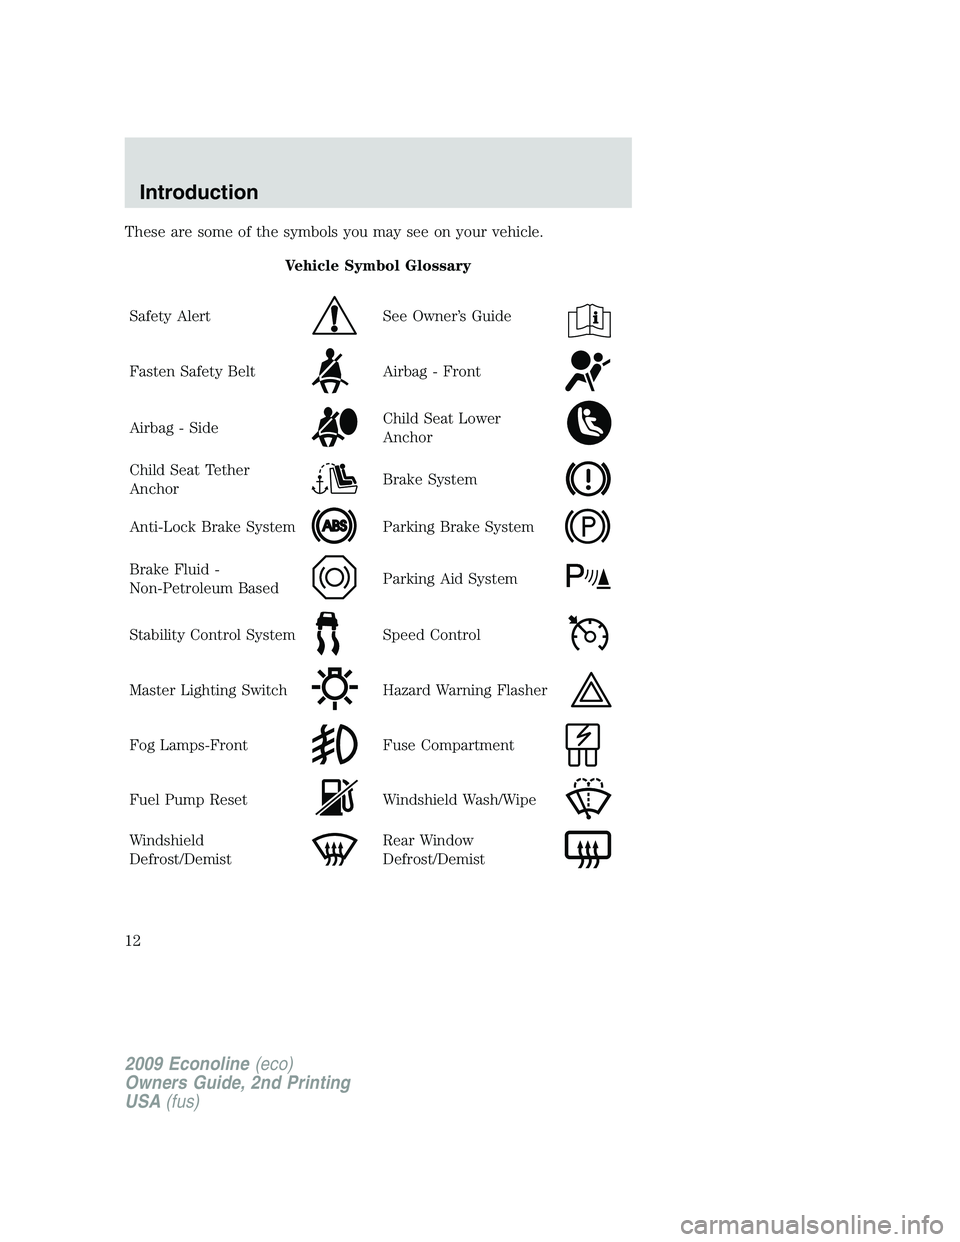 FORD E150 2009  Owners Manual These are some of the symbols you may see on your vehicle.
Vehicle Symbol Glossary
Safety Alert
See Owner’s Guide
Fasten Safety BeltAirbag - Front
Airbag - SideChild Seat Lower
Anchor
Child Seat Tet